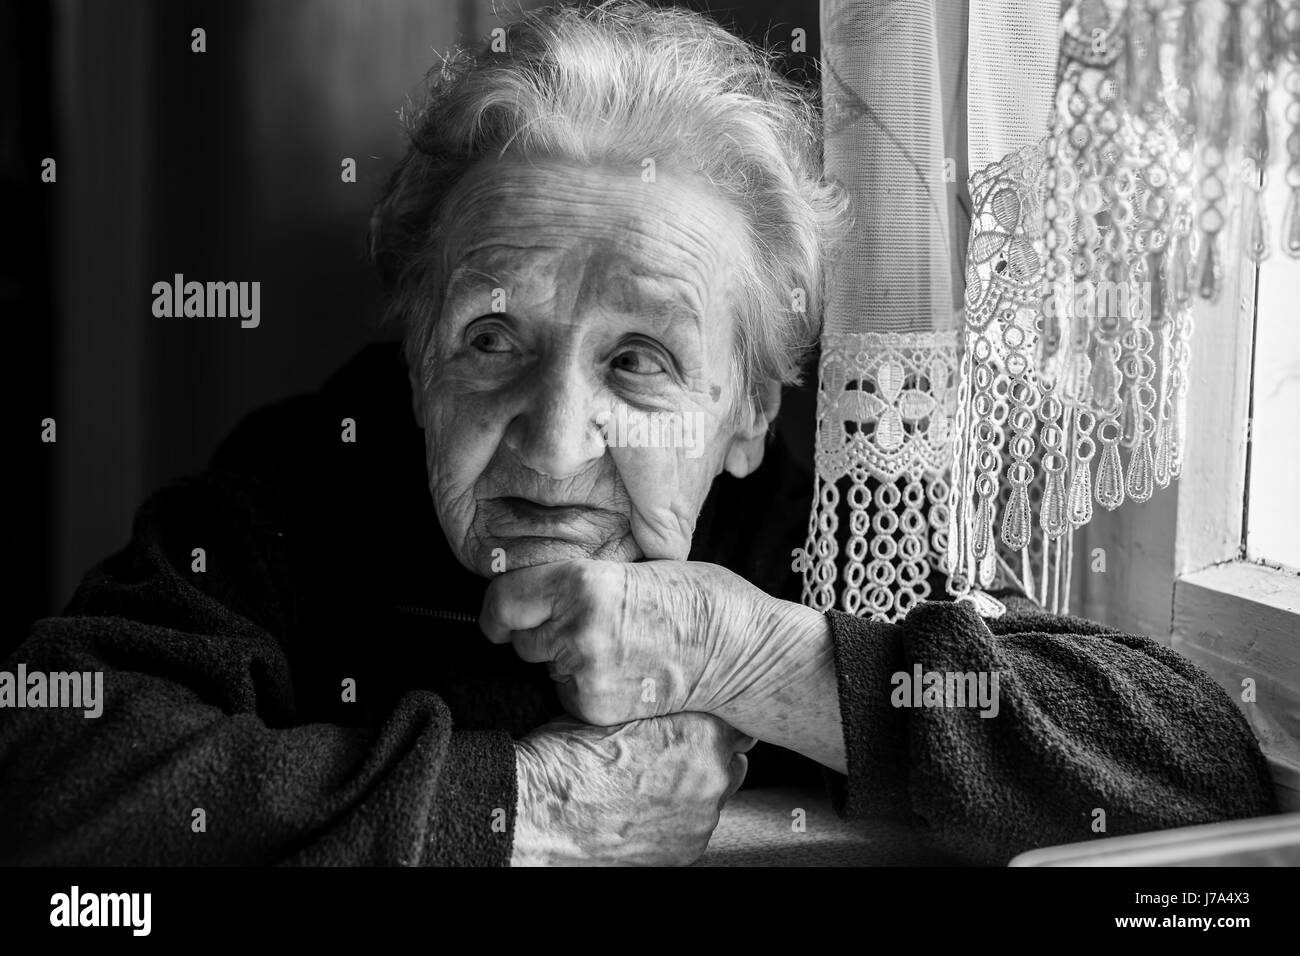 Black-and-white portrait of an elderly woman. Stock Photo